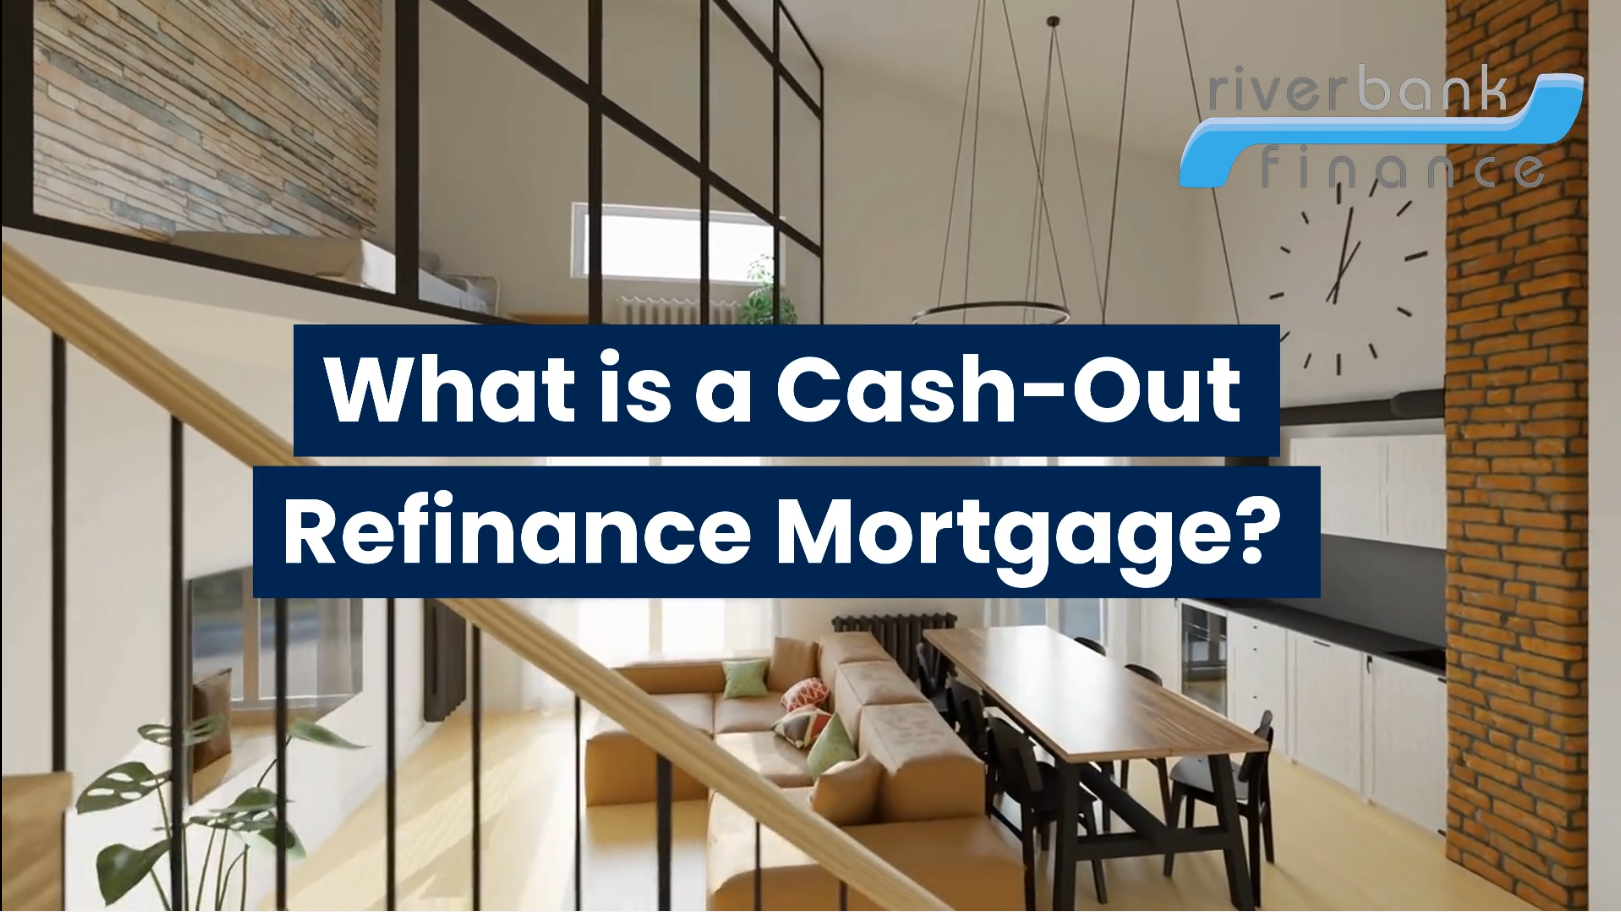 Is a Cashout Refinance Mortgage right for me?